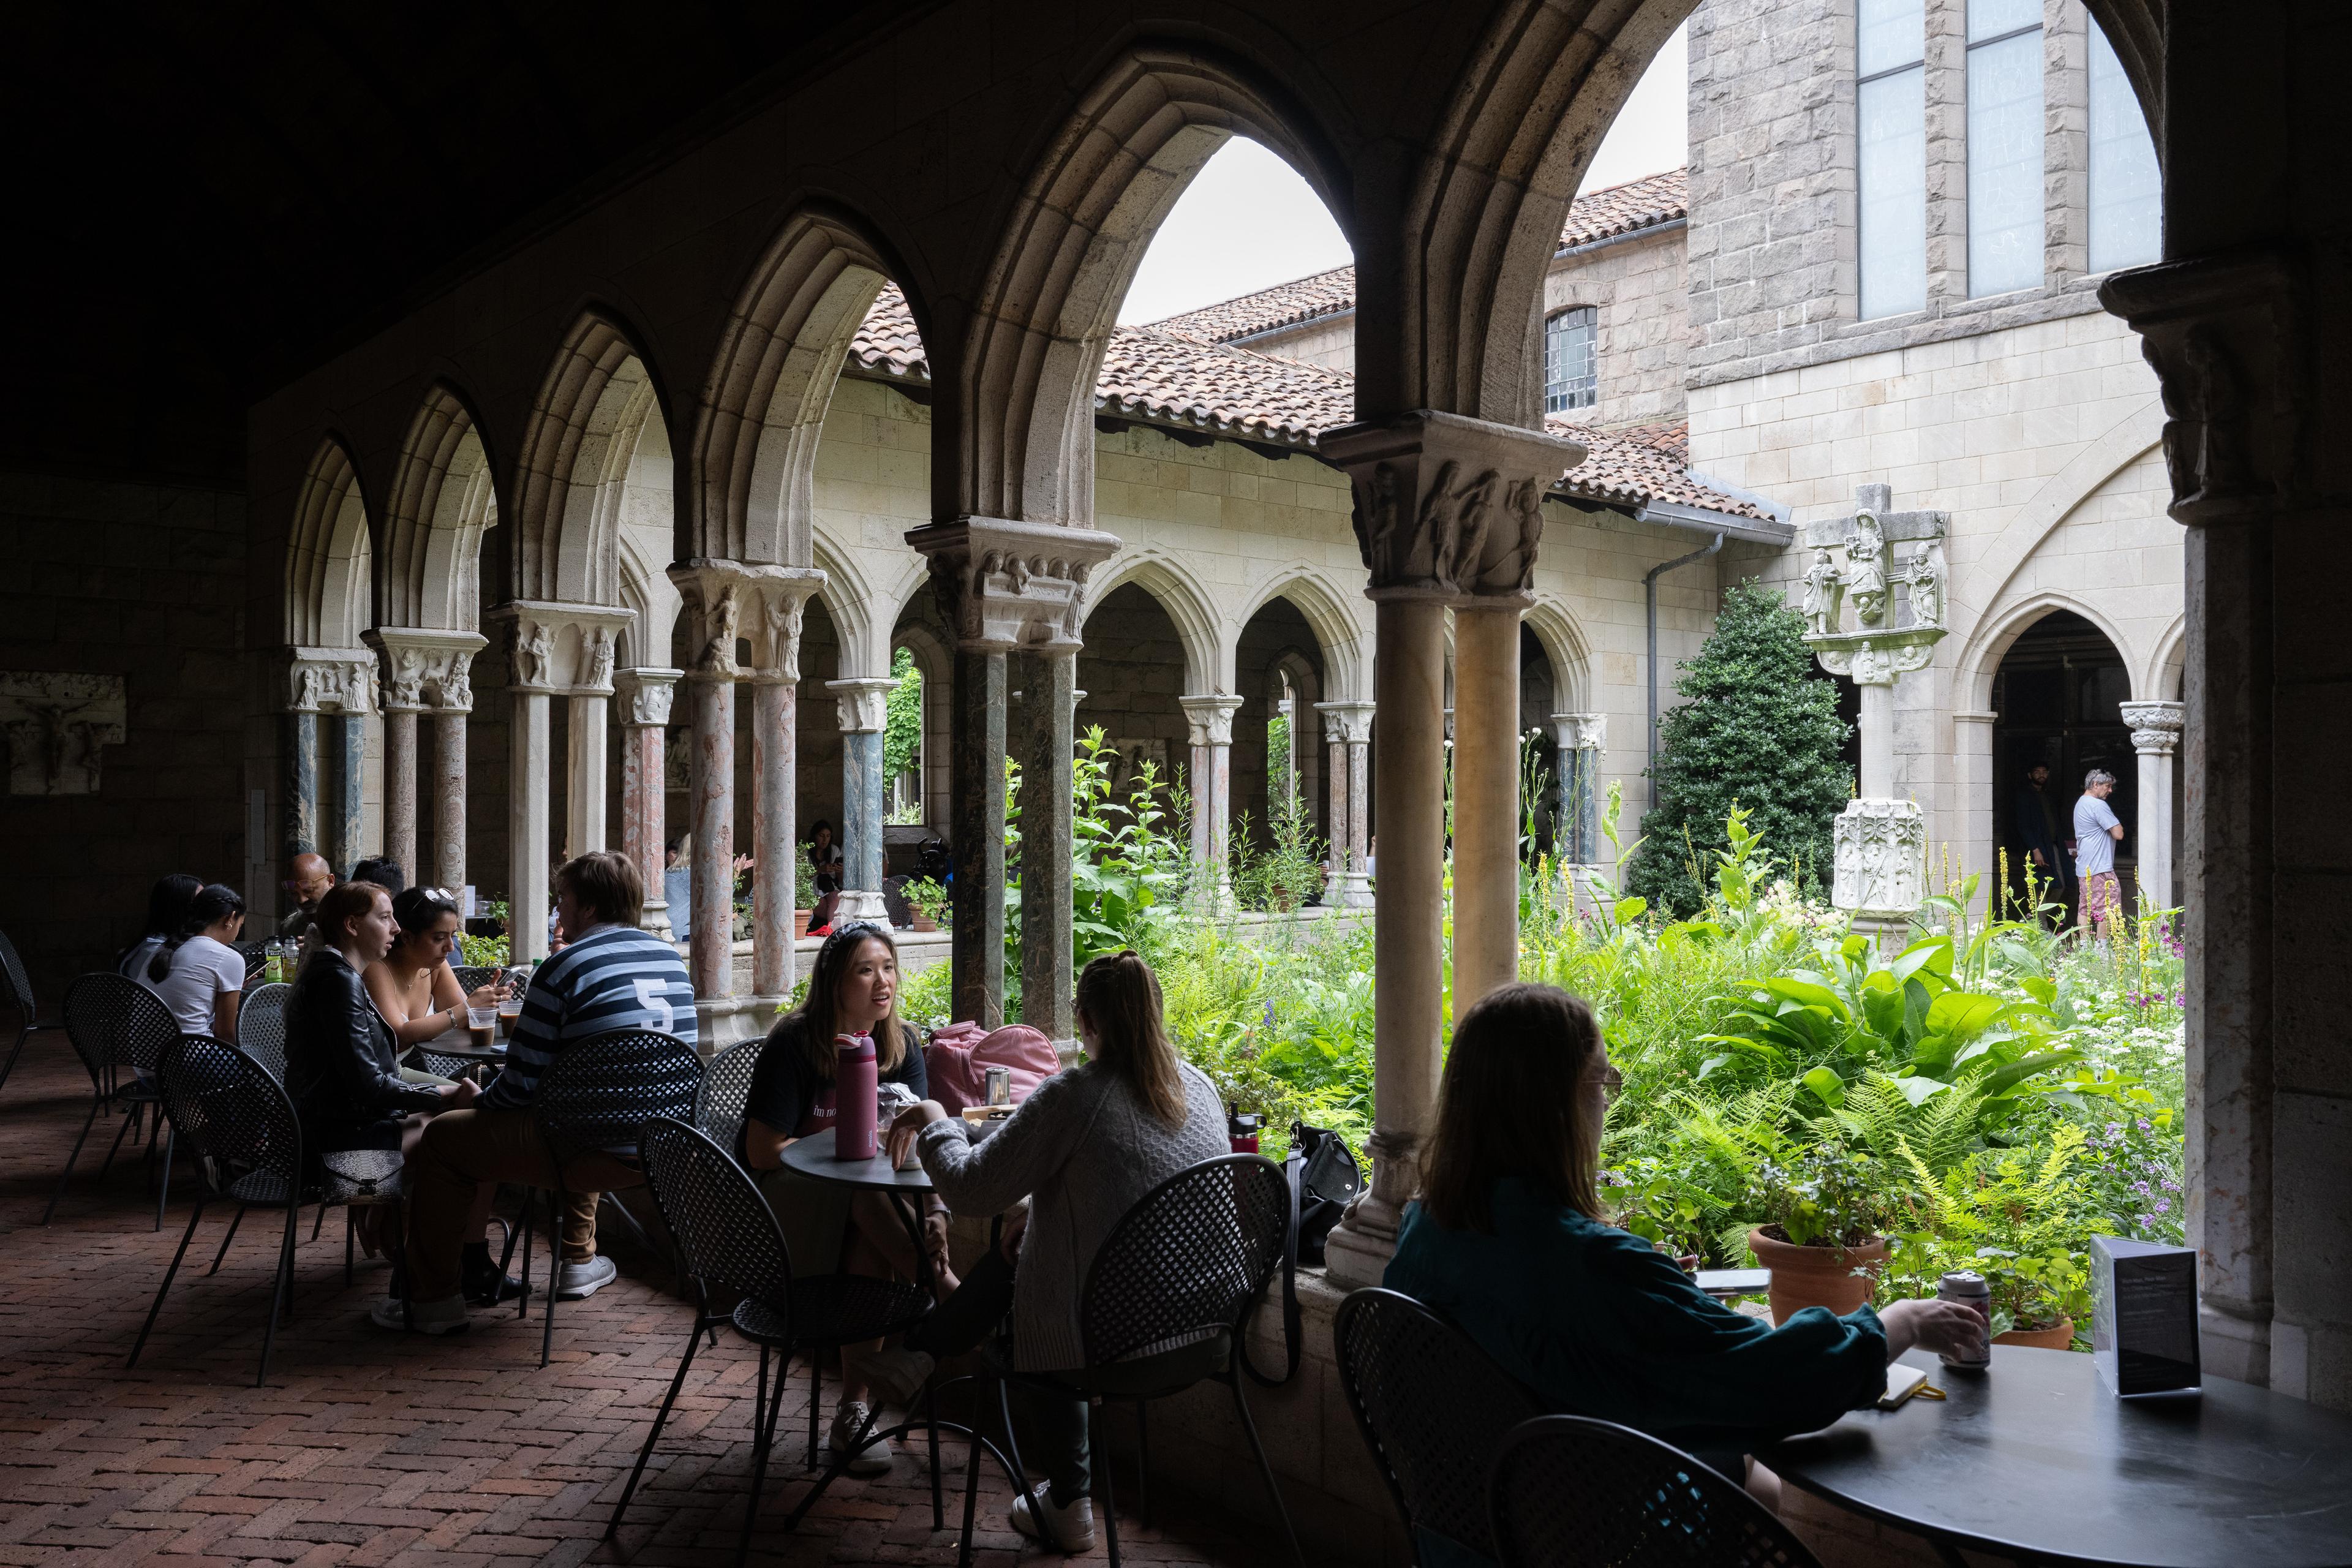 Patrons sit at tables and chairs in a stone arcade overlooking a garden.